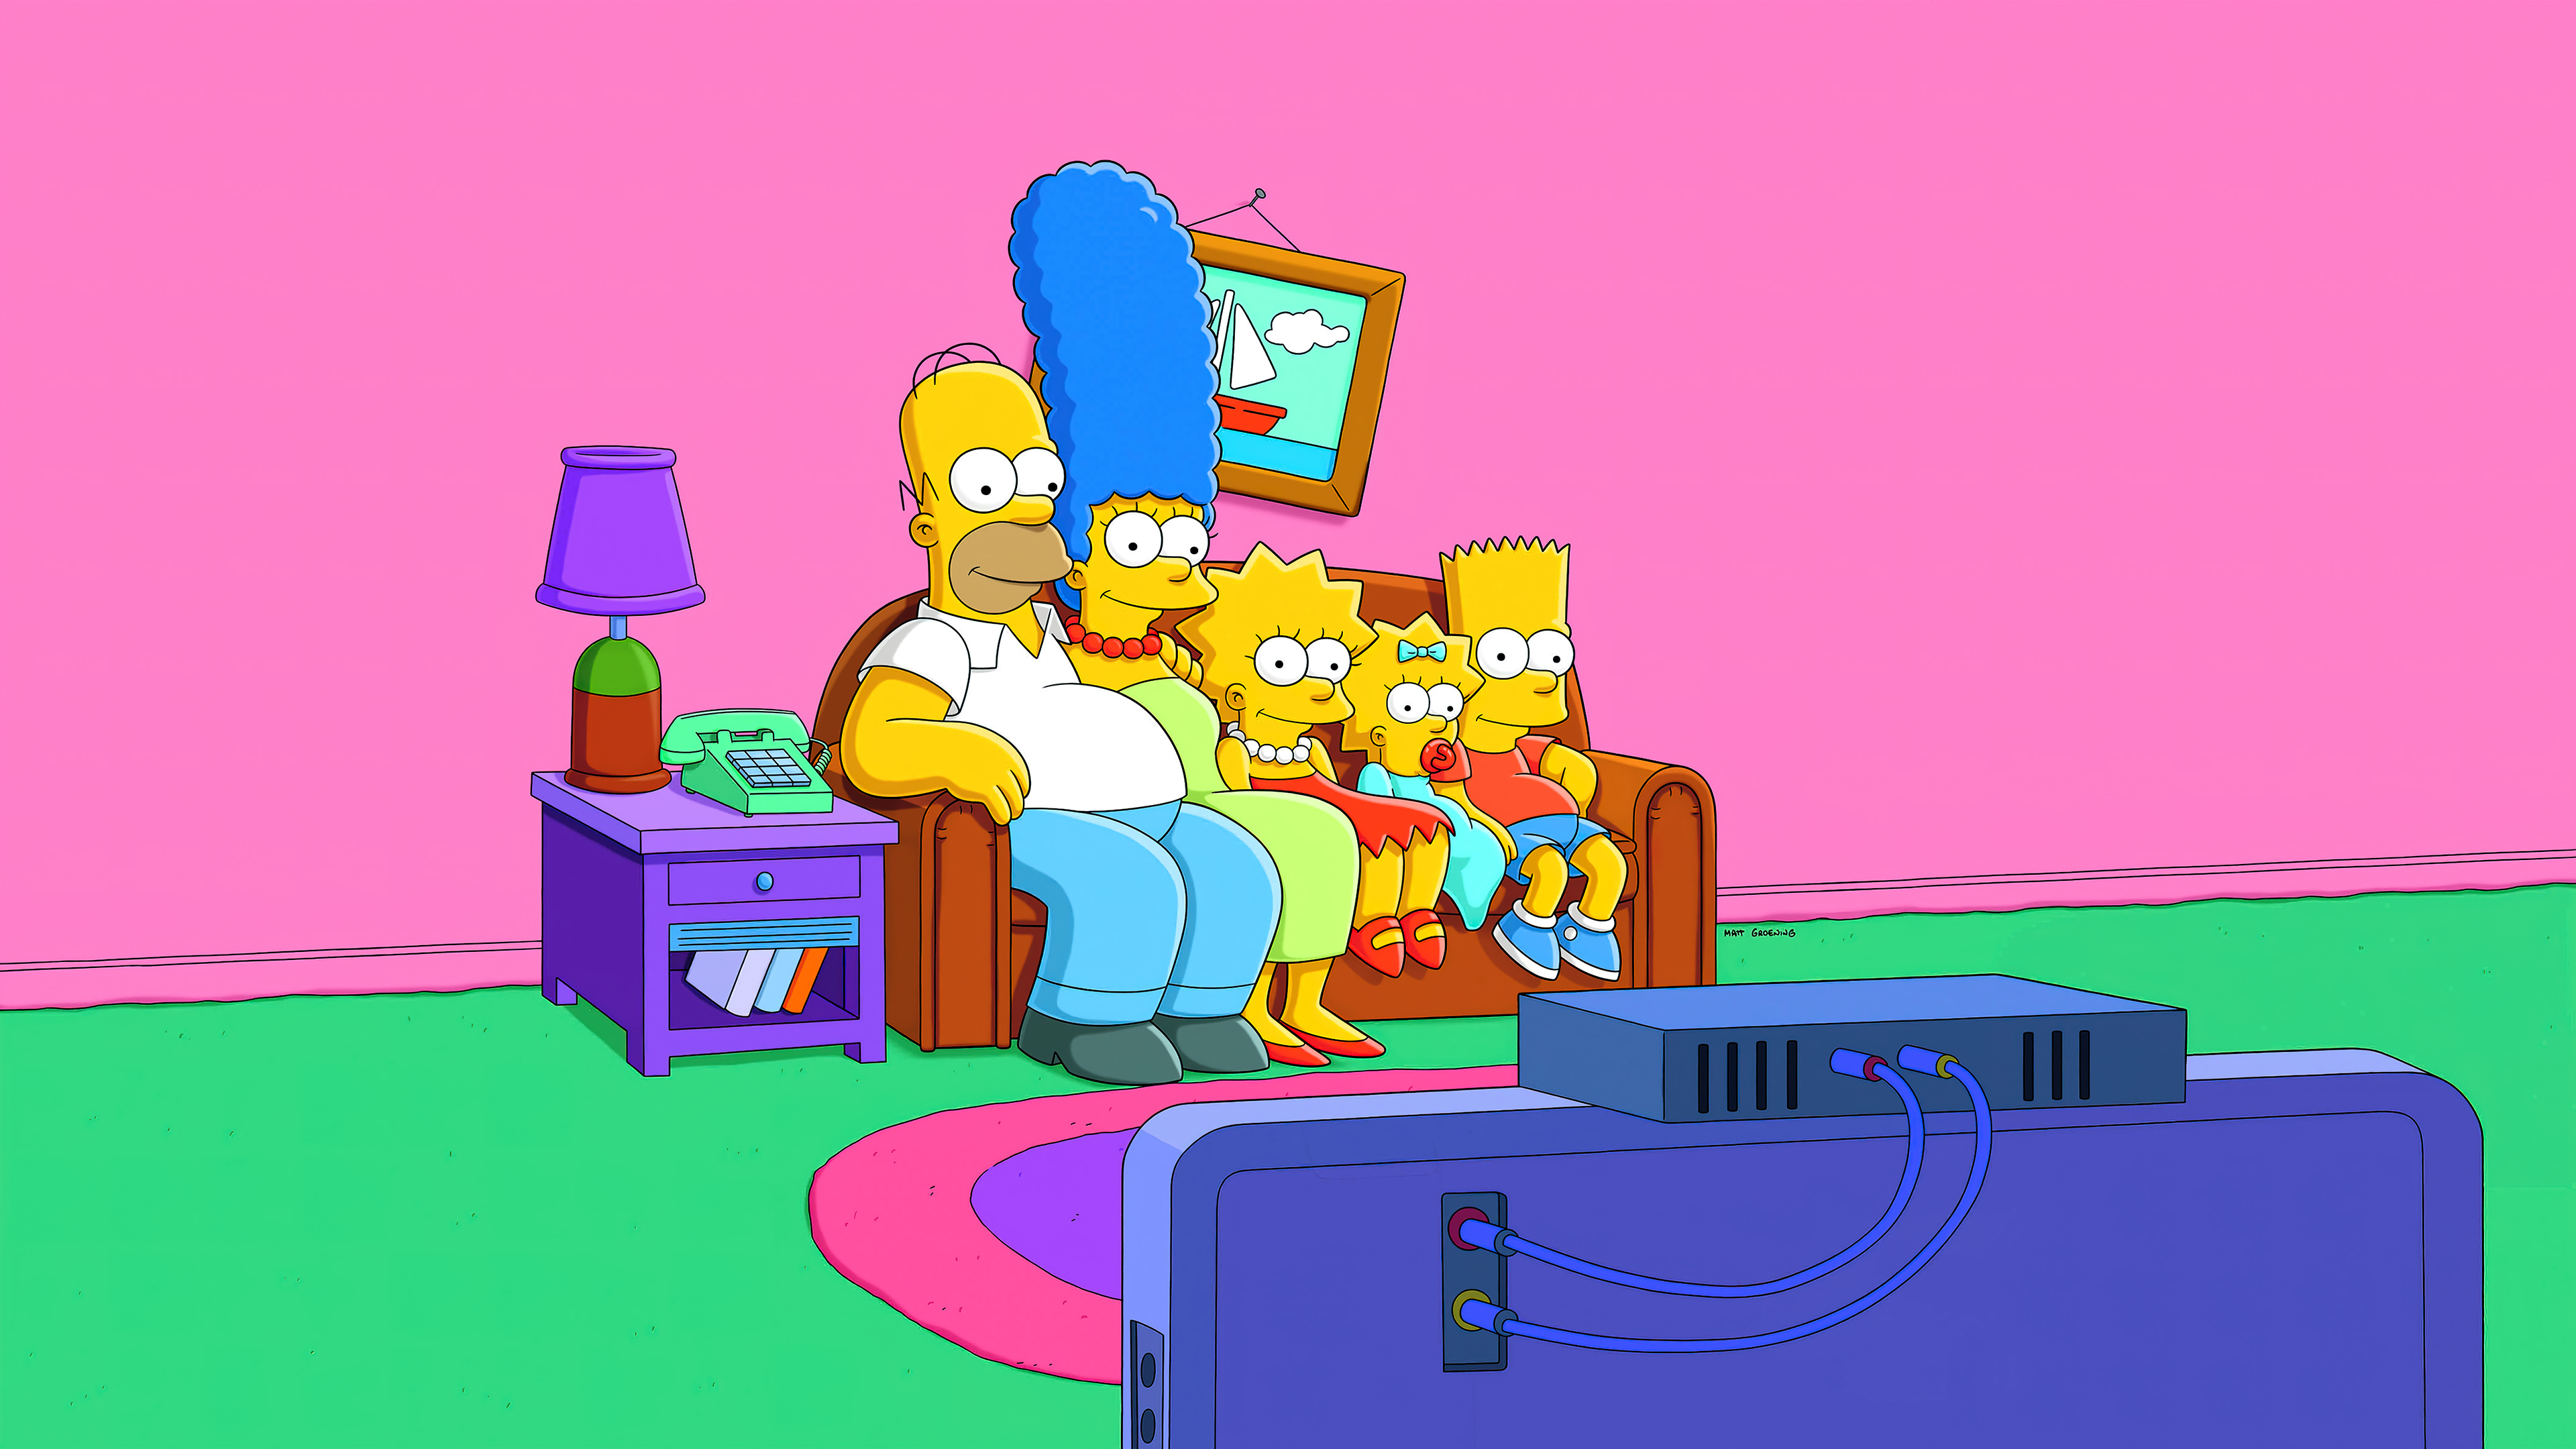 HD wallpaper featuring The Simpsons family sitting on the couch in their living room, perfect for desktop background.